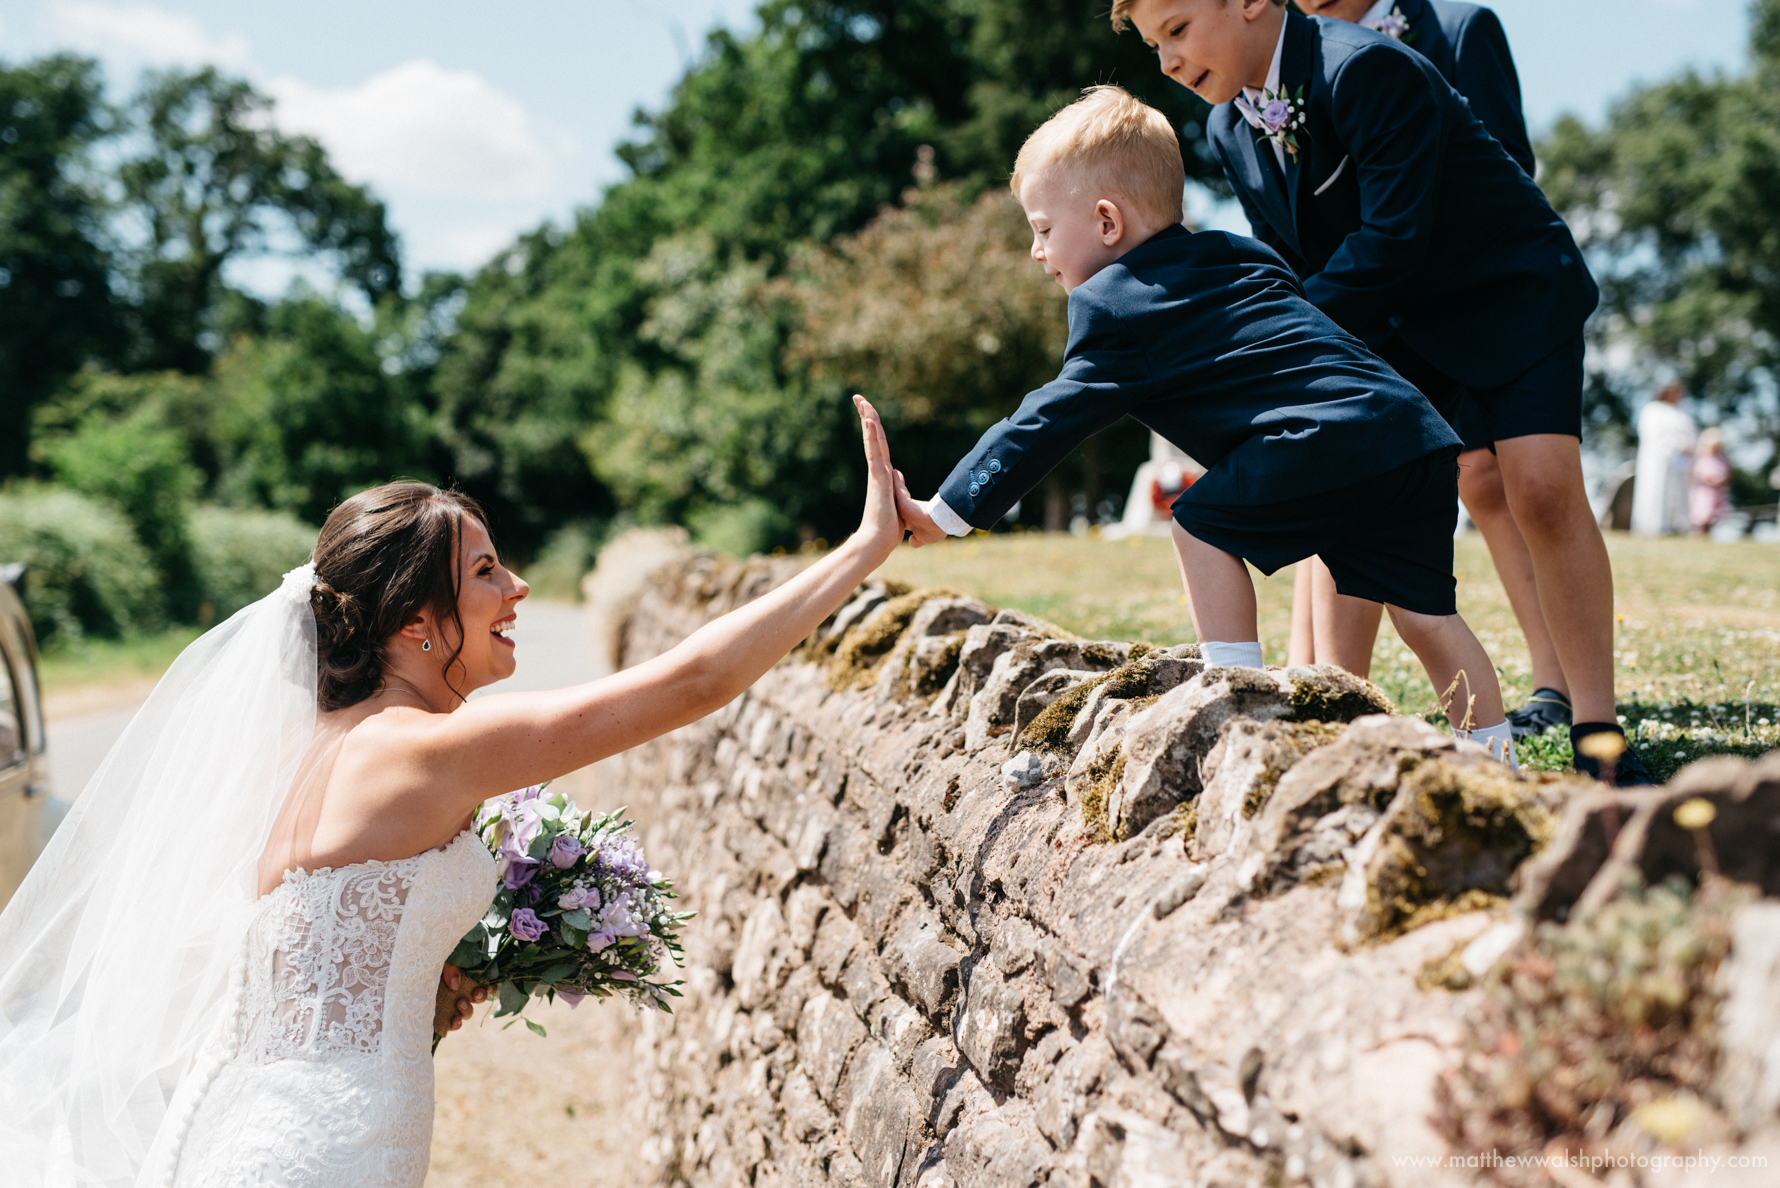 High 5 time for the bride and little boy